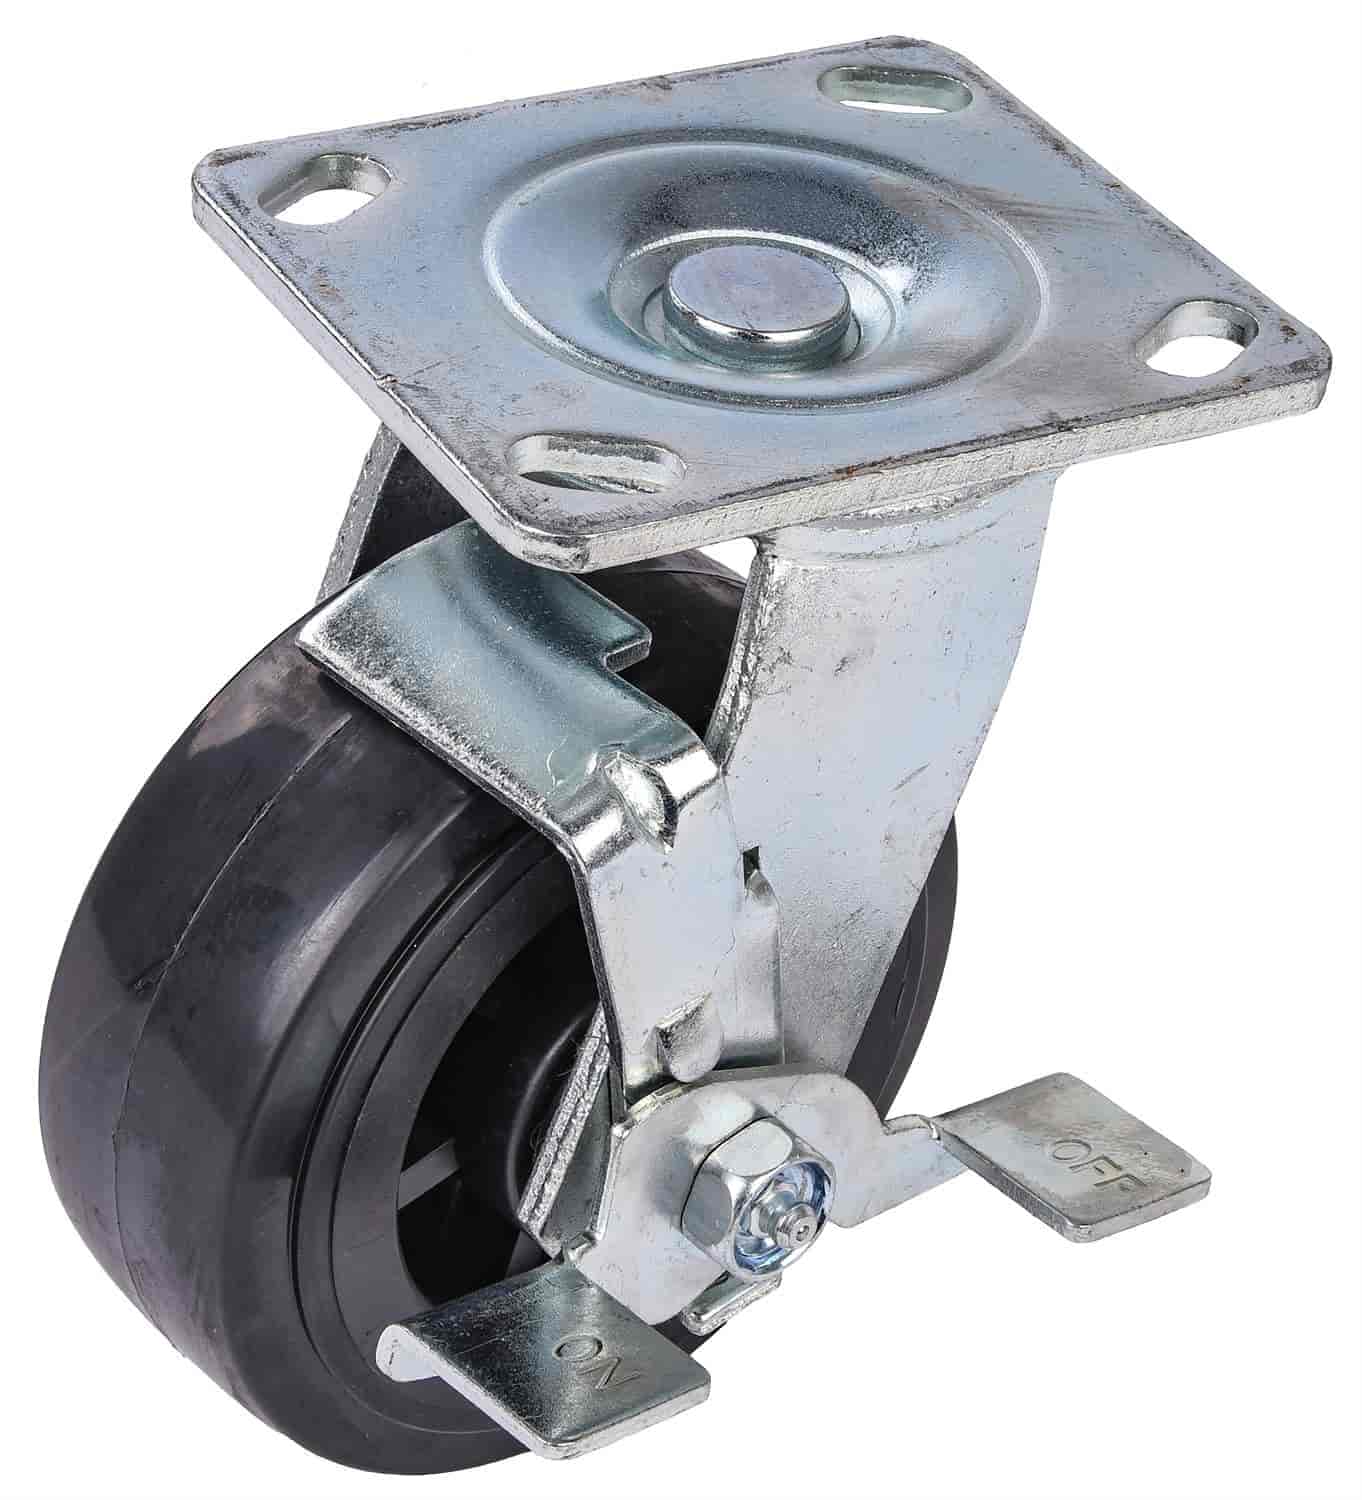 Replacement Swivel Caster Wheel Fits JEGS Adjustable Height Gantry Crane 1-Ton (555-81245)